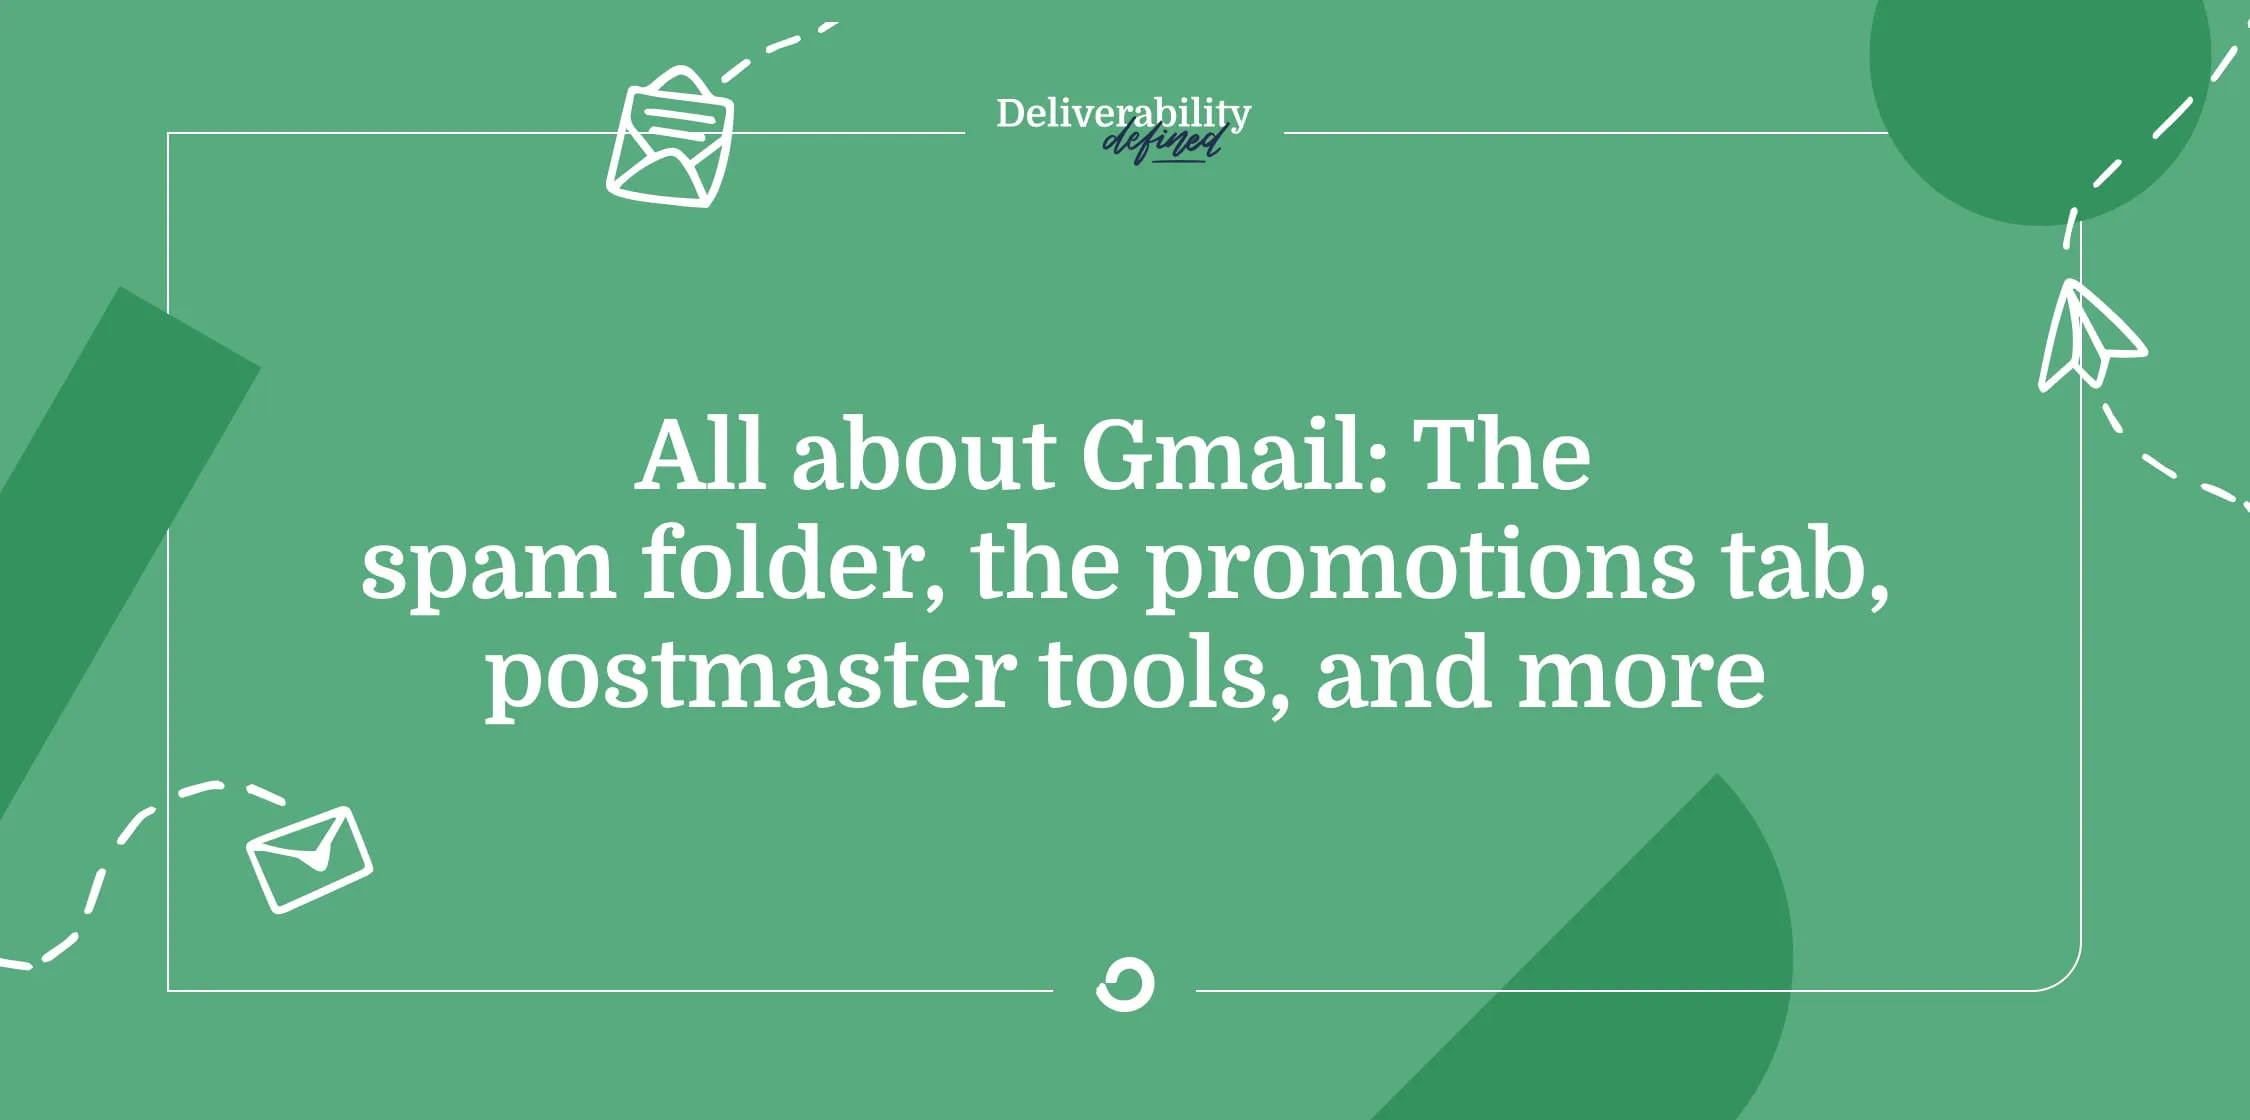 All about Gmail: The spam folder, the promotions tab, postmaster tools, and more